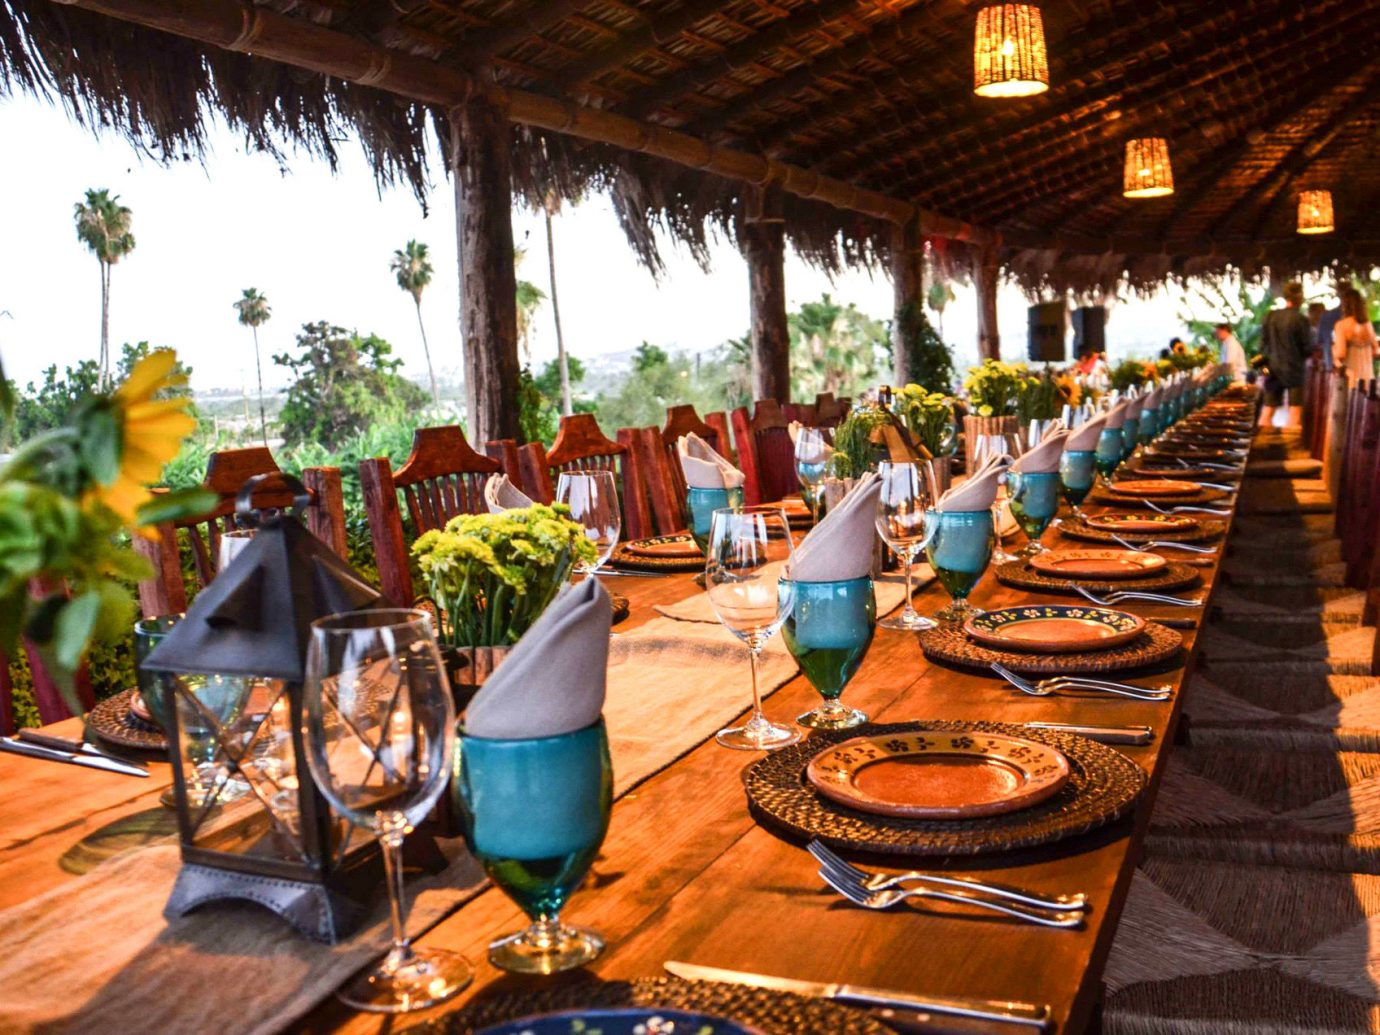 colorful Dining flowers Greenery isolation outdoor dining Outdoors private remote restaurant Rustic Scenic views table table setting thatched roof Travel Tips Trip Ideas view outdoor Resort meal tourism wooden estate wood furniture several dining table